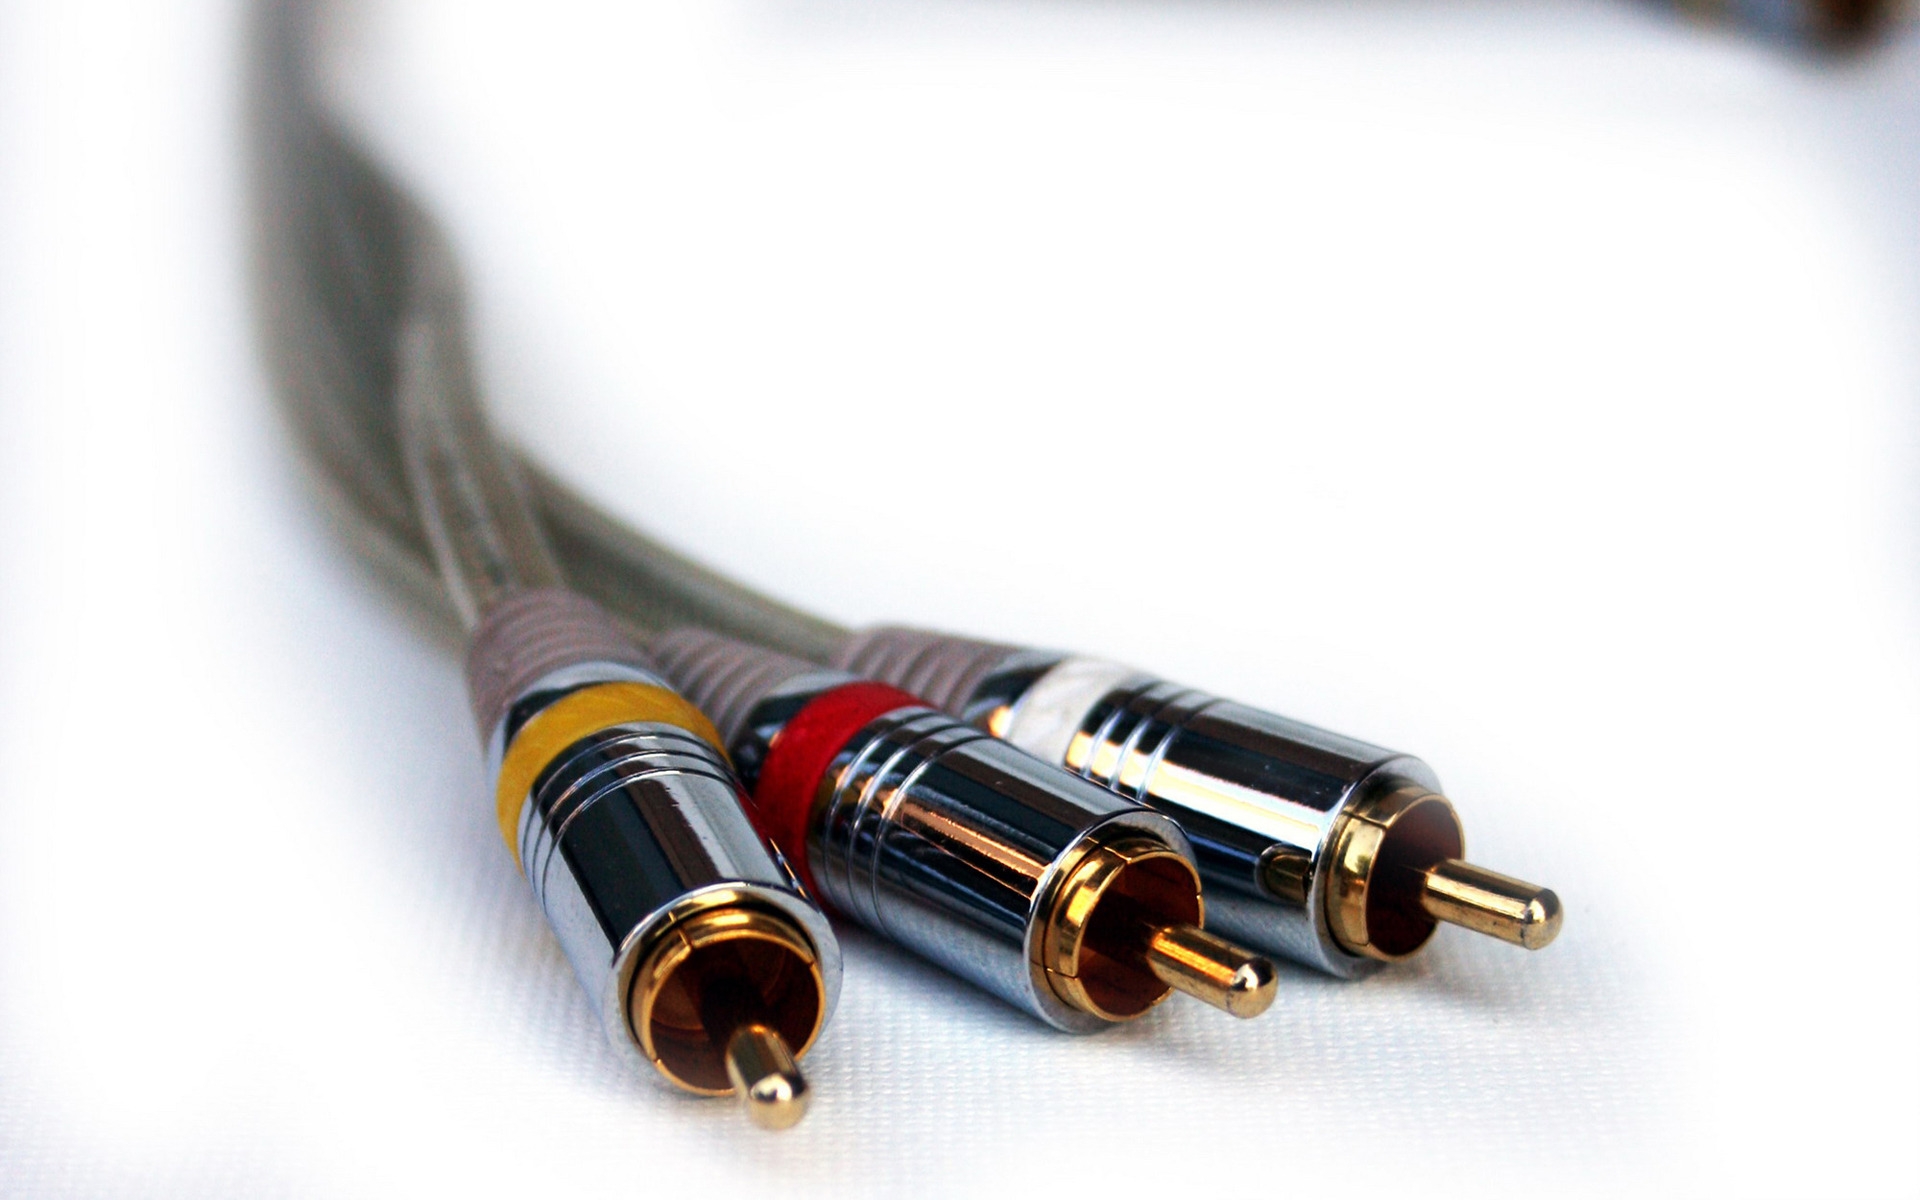 RCA Cable for 1920 x 1200 widescreen resolution